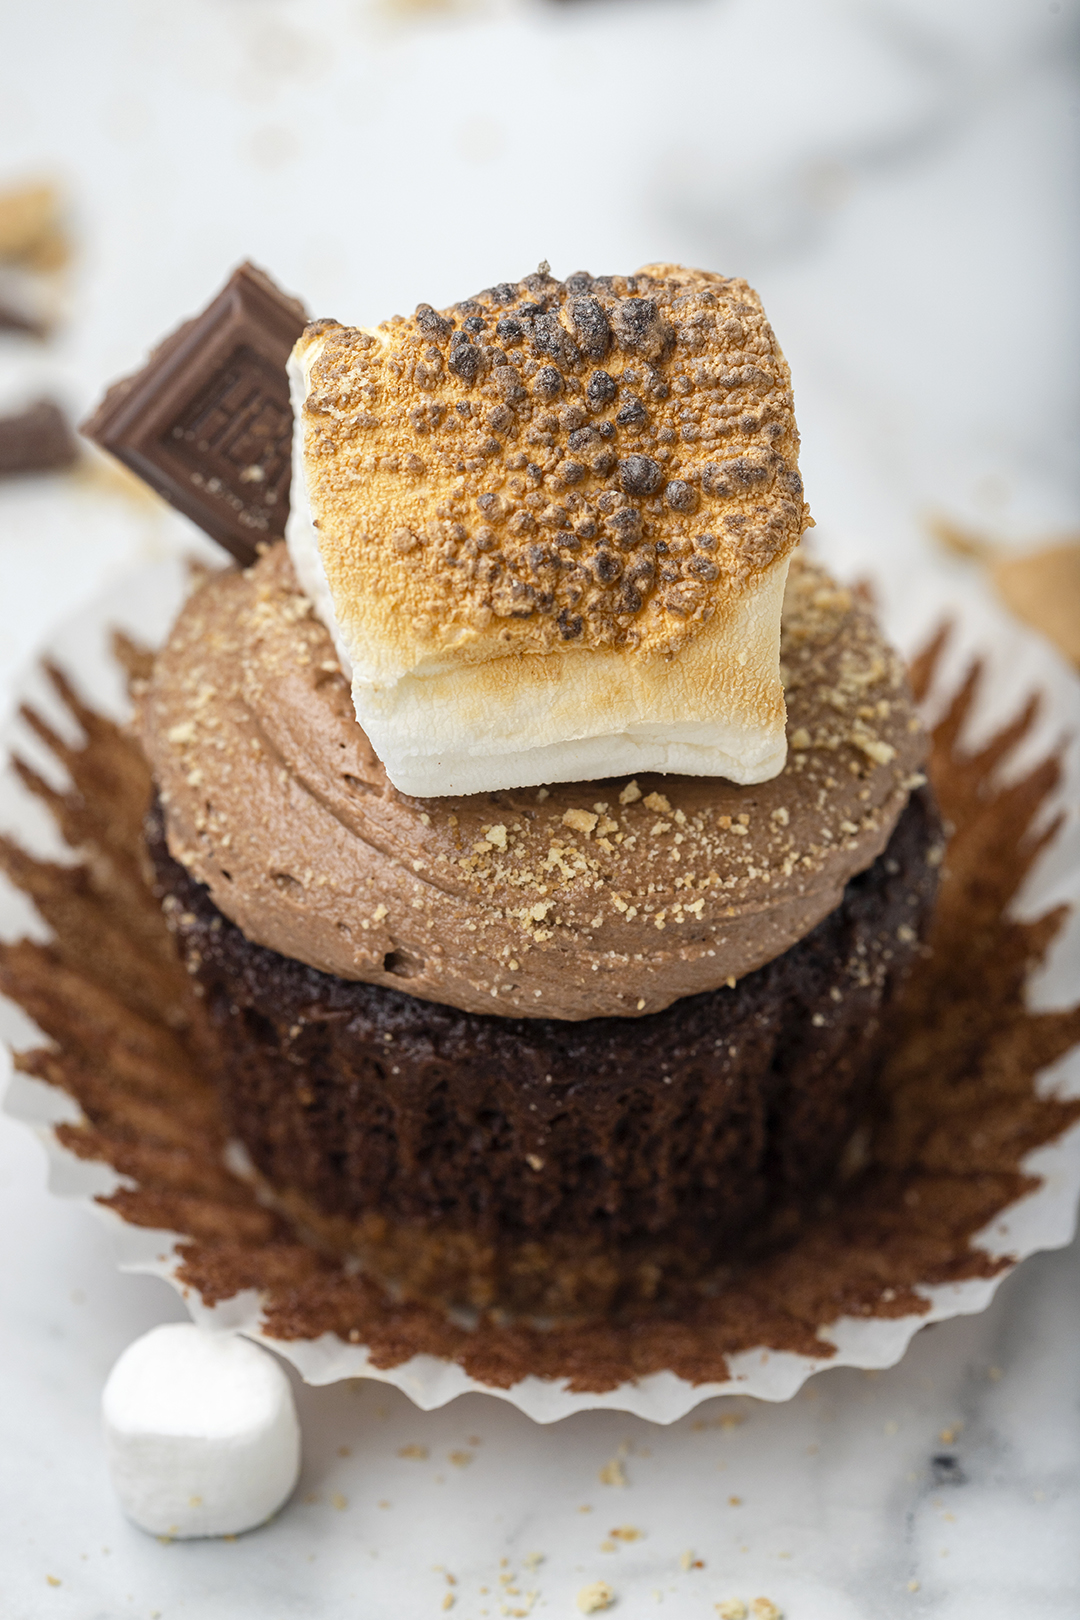 slightly angled shot of s'mores cupcake with chocolate base, chocolate frosting with toasted square marshmallow and Hershey's chocolate